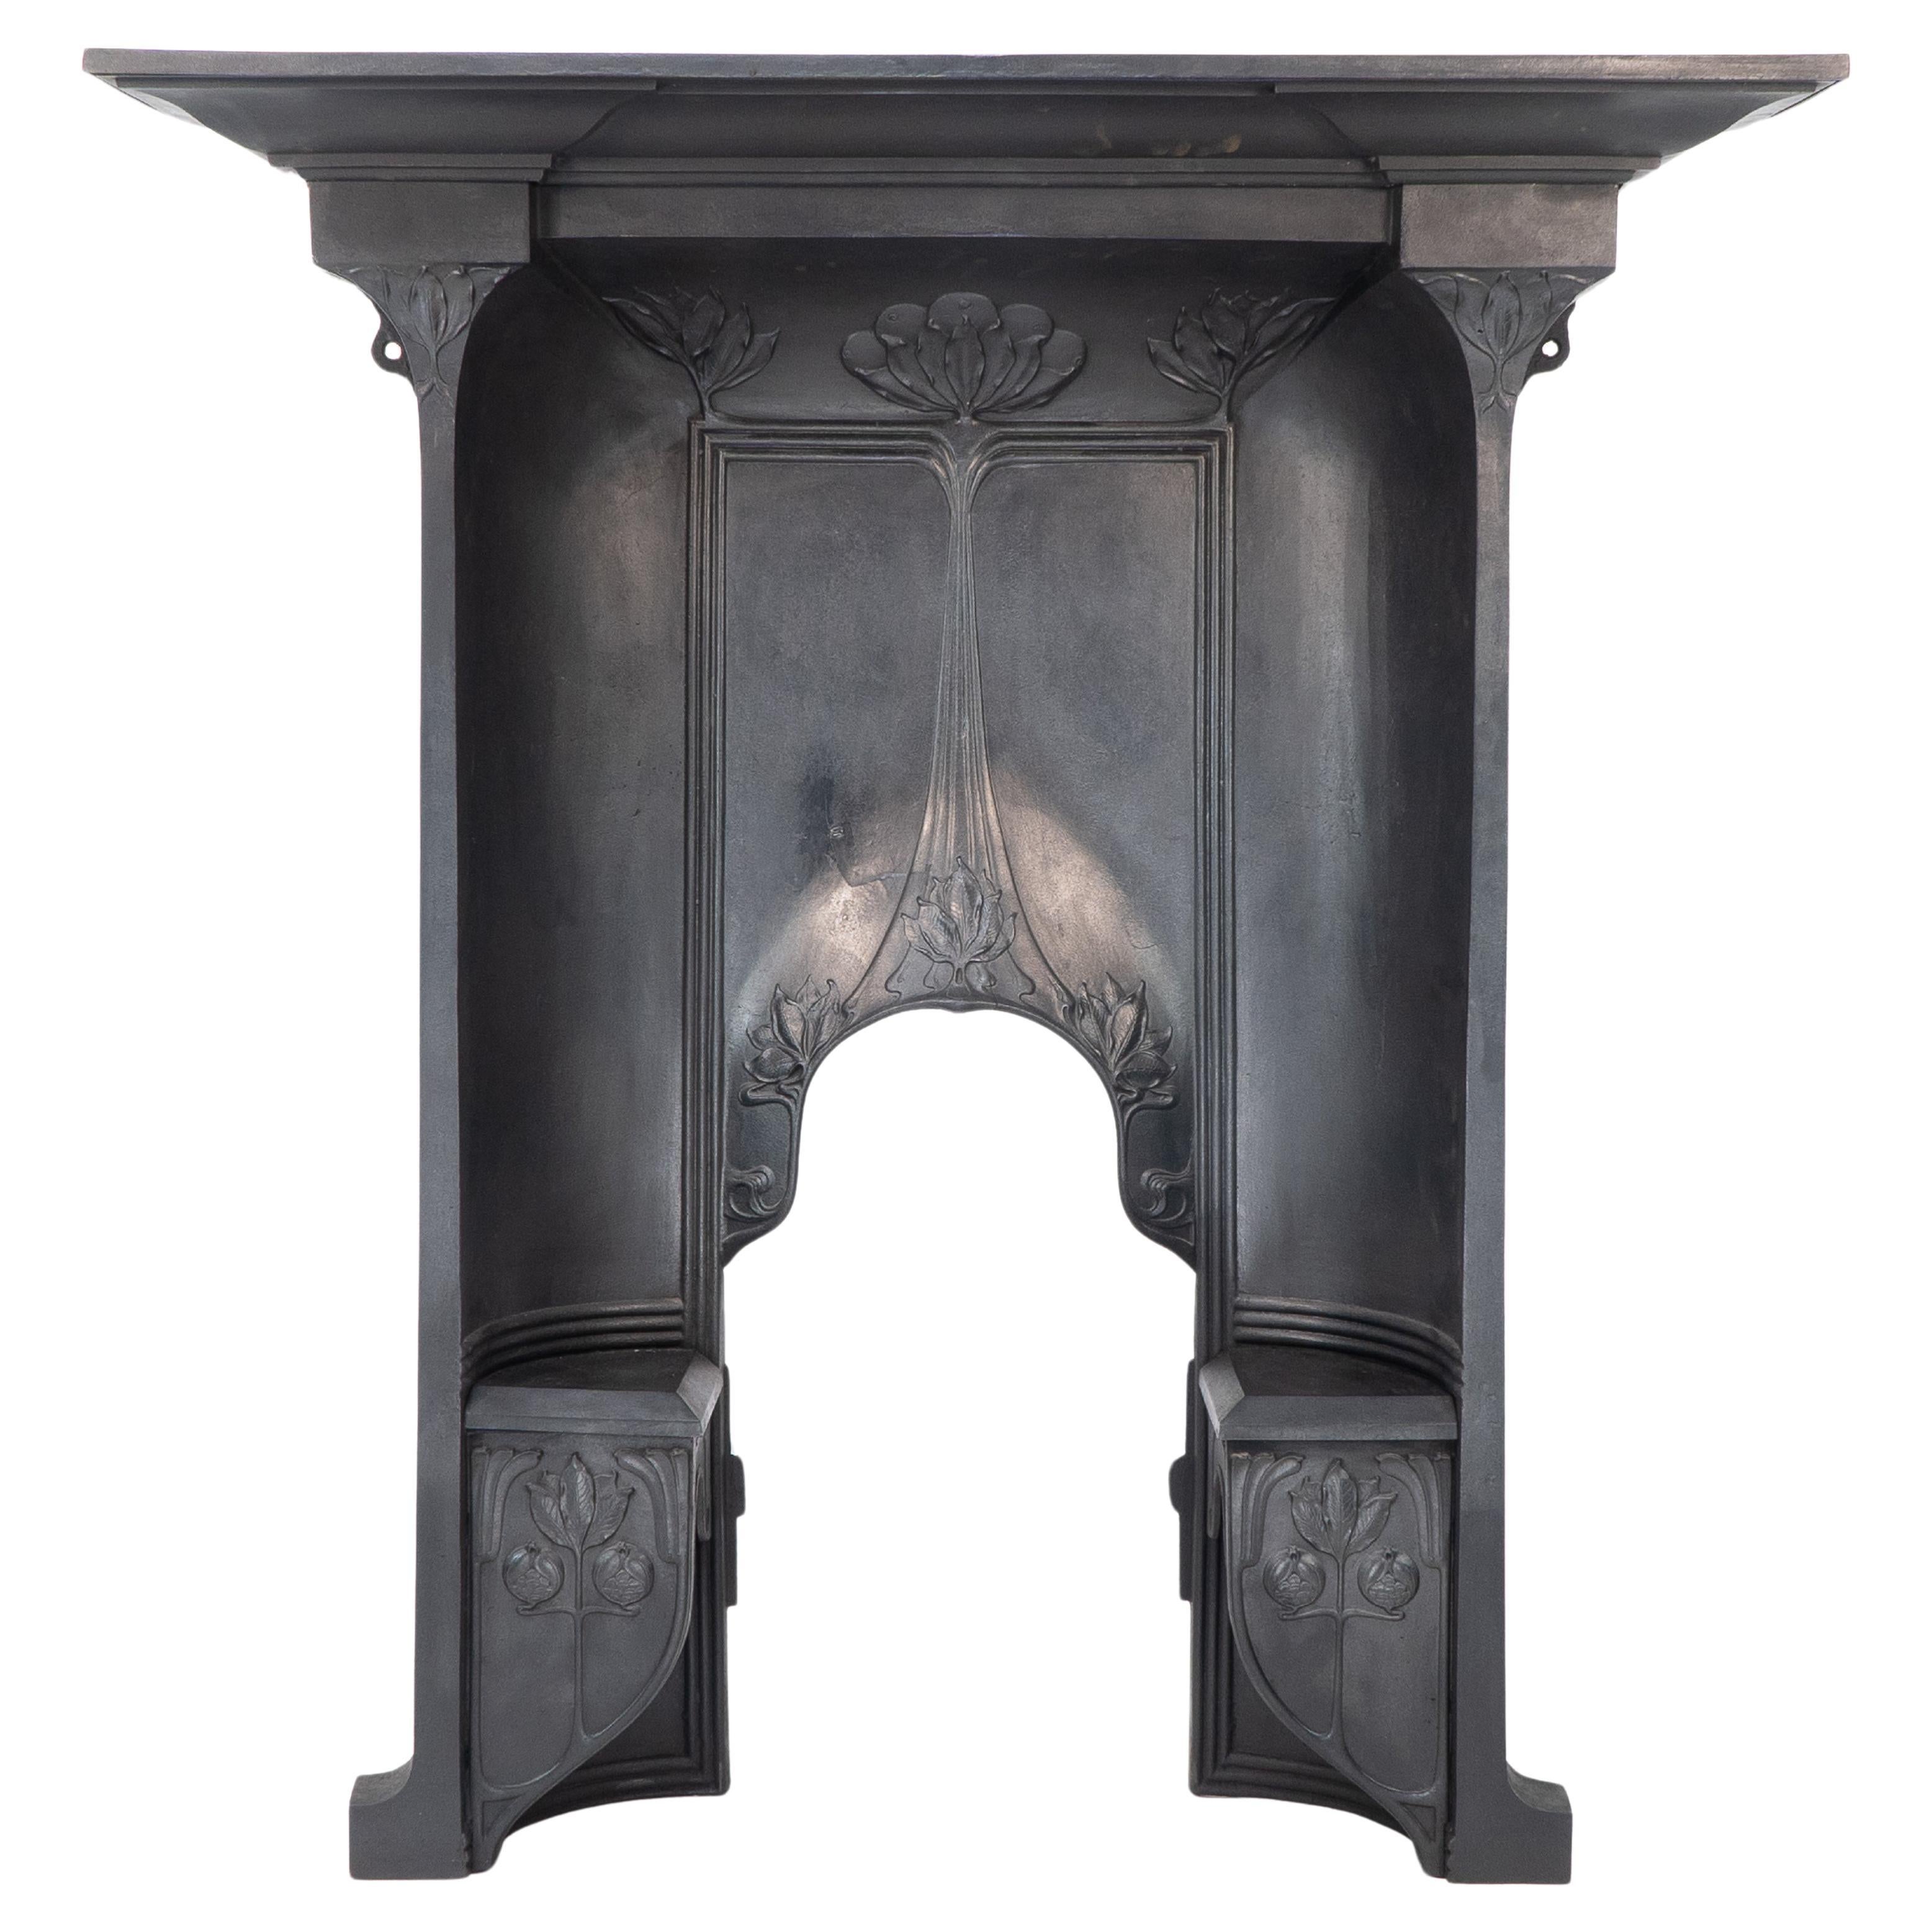 Arts & Crafts cast iron fireplace with curved sides & stylized floral decoration For Sale